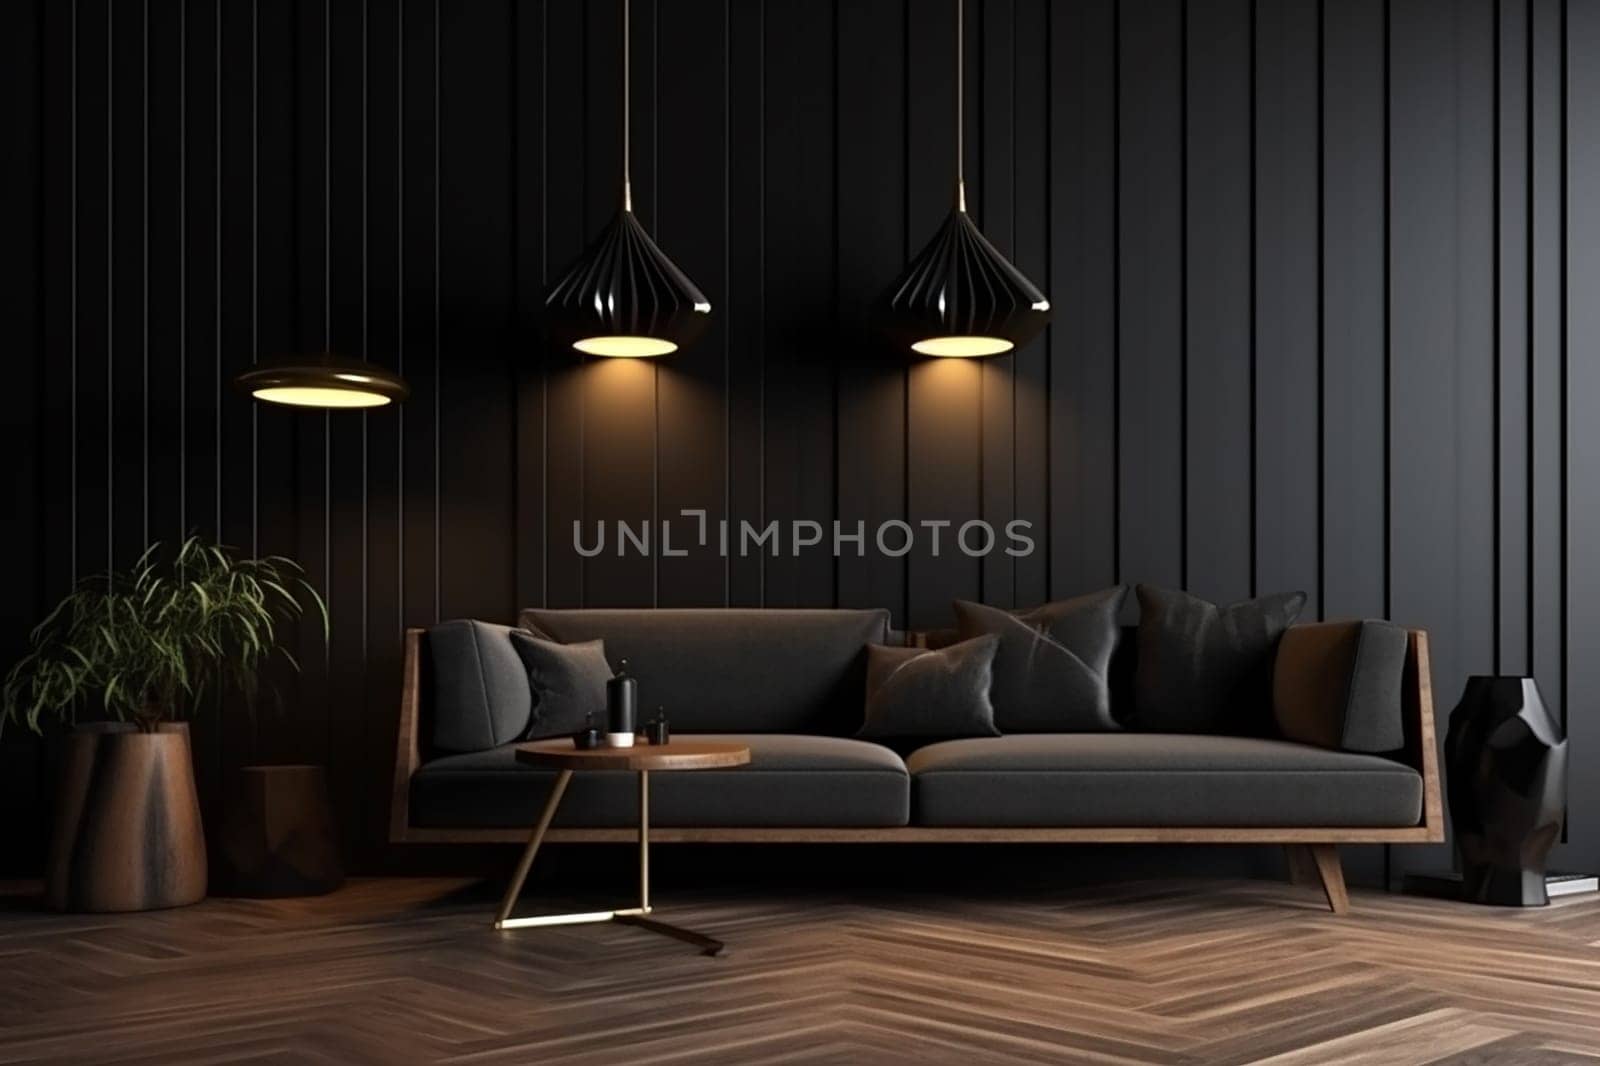 Modern living room interior with elegant sofa, pendant lights, and wooden floor. Stylish dark wall design with cozy ambiance.